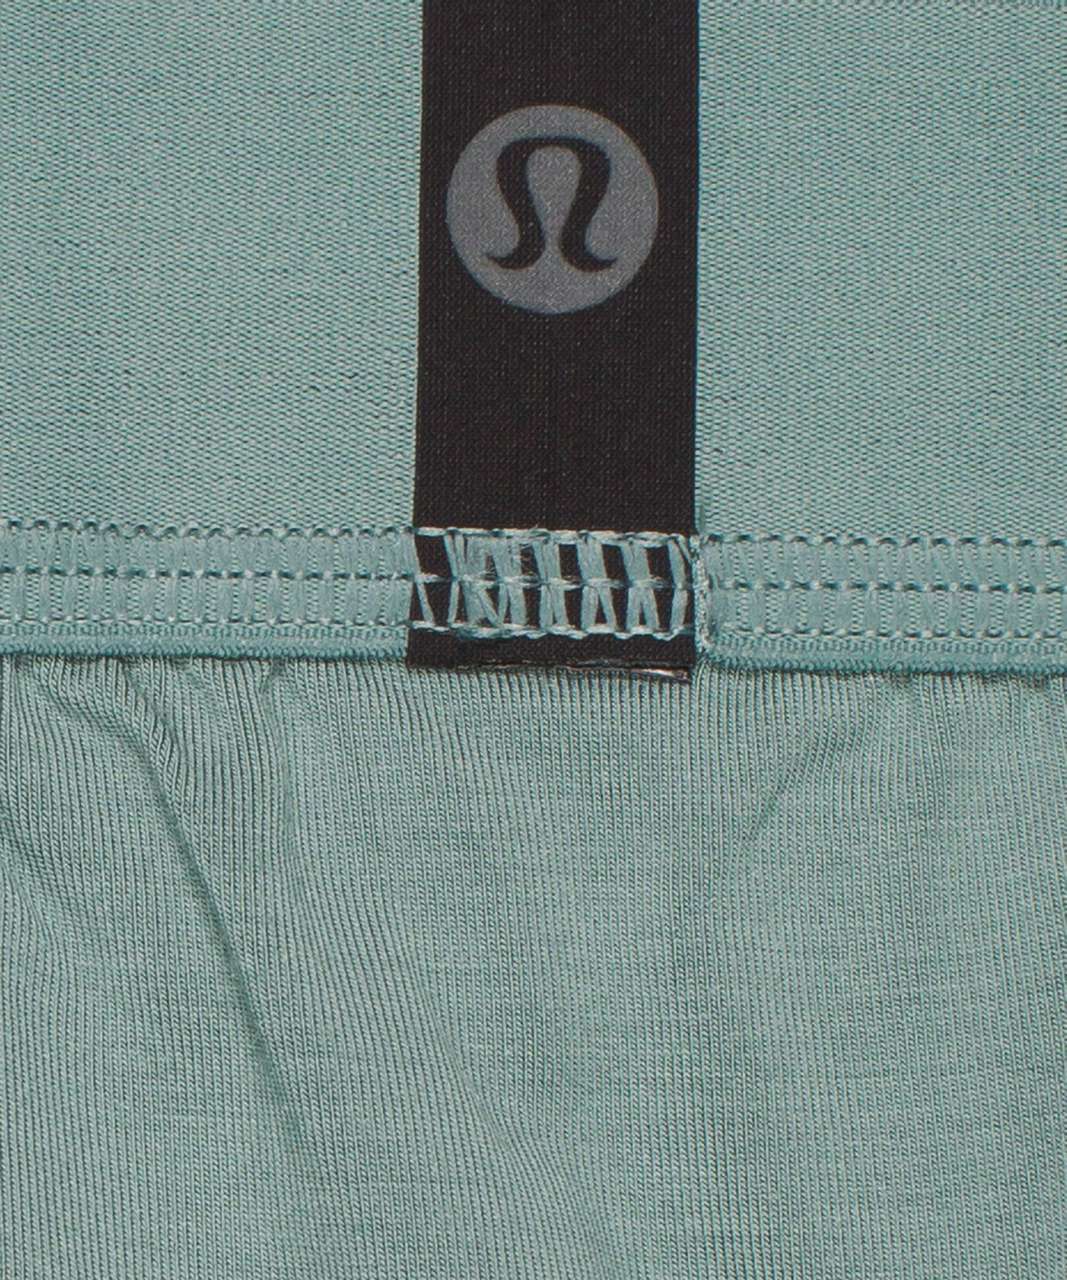 Lululemon Always In Motion Boxer with Fly 5" 3 Pack - Peri Purple / Tidewater Teal / Canyon Rock